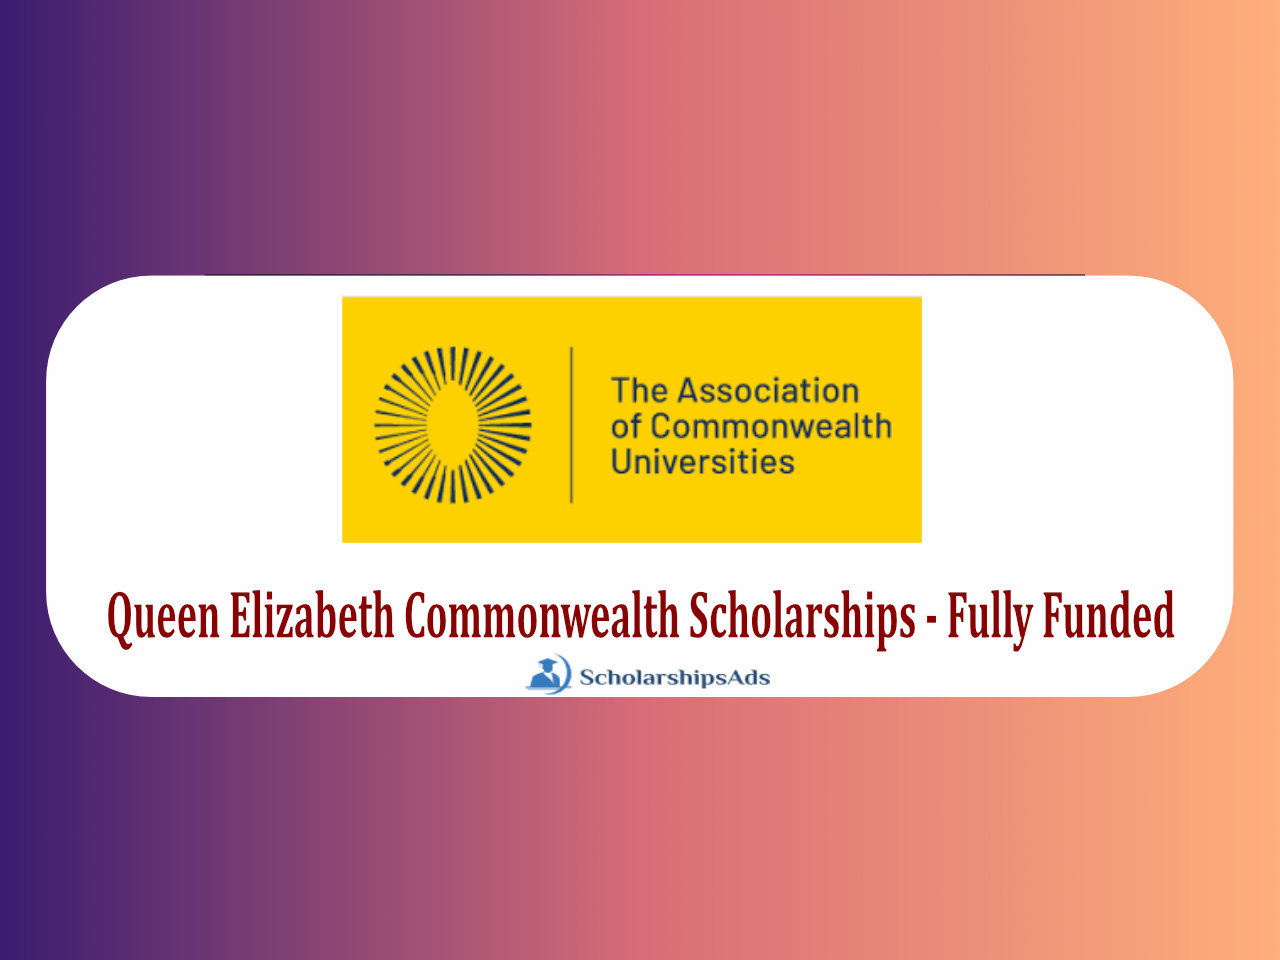  Fully Funded Queen Elizabeth Commonwealth Scholarships. 